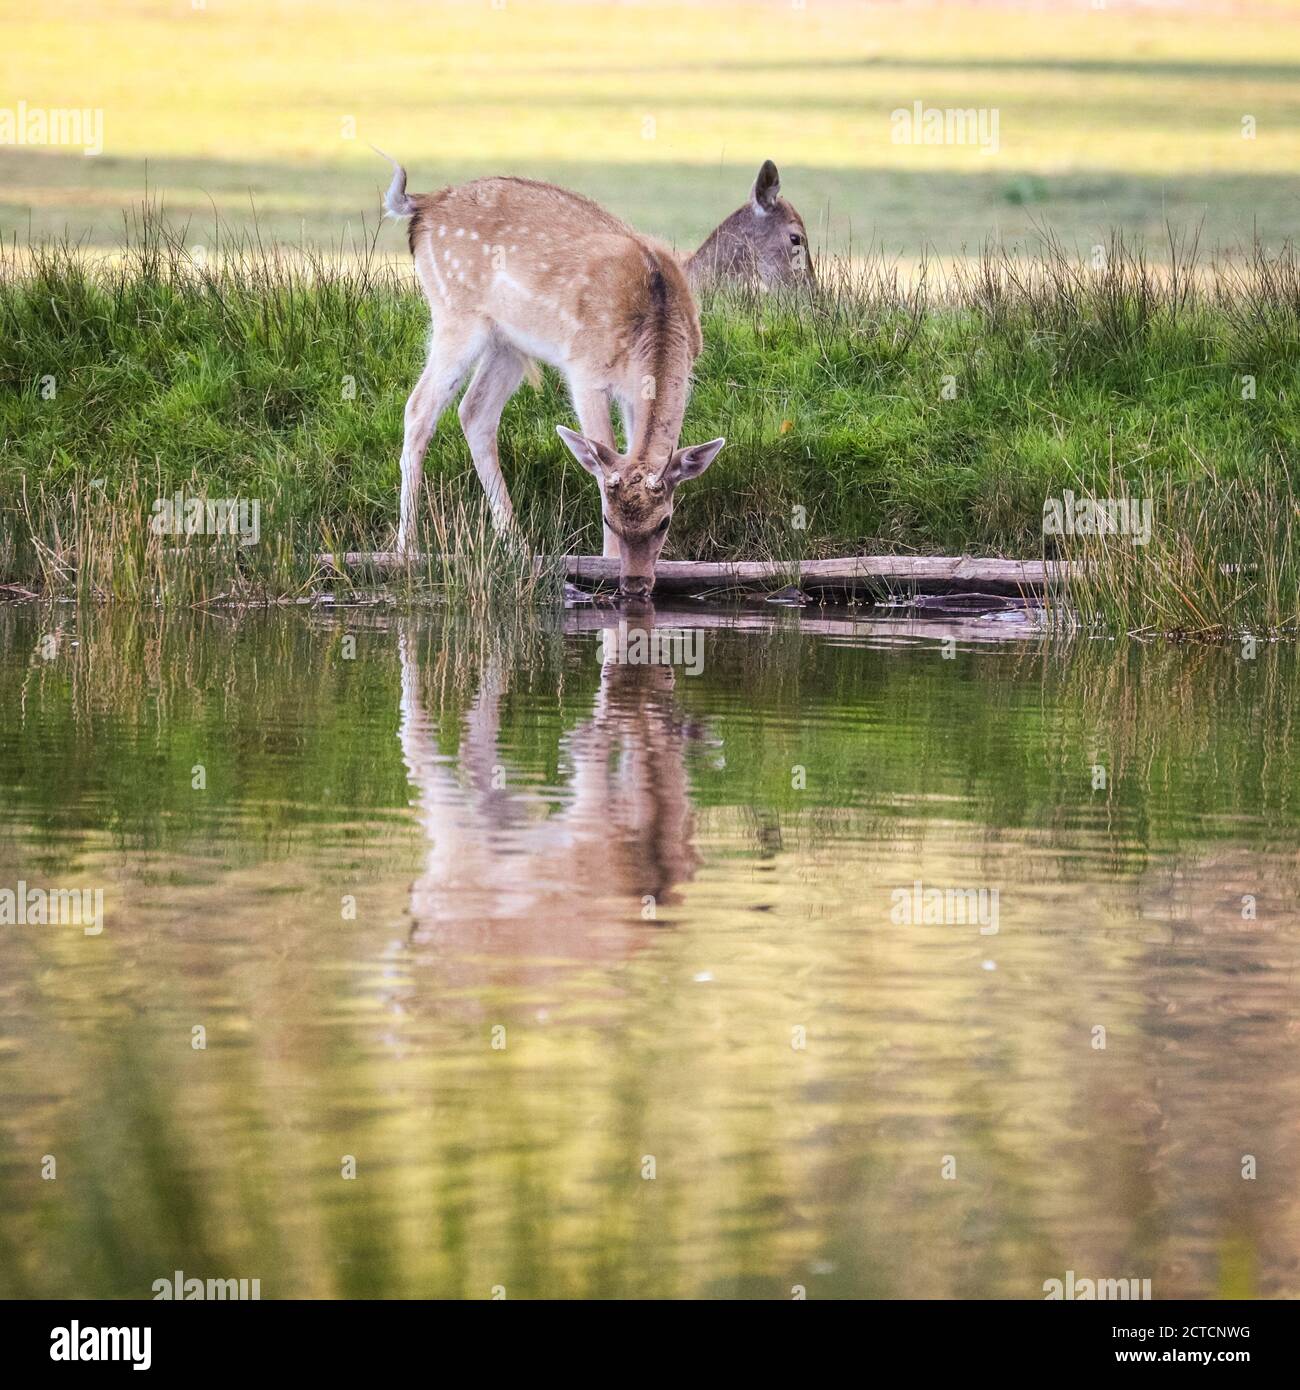 Dulmen, Germany, 22nd Sep, 2020. A fallow deer (dama dama) stops by a pond to drink in the warm evening sun. Wildlife enjoy the last of the beautiful sunshine in 27 degrees on an unusually warm first day of autumn in the Munsterland countryside today. Credit: Imageplotter/Alamy Live News Stock Photo